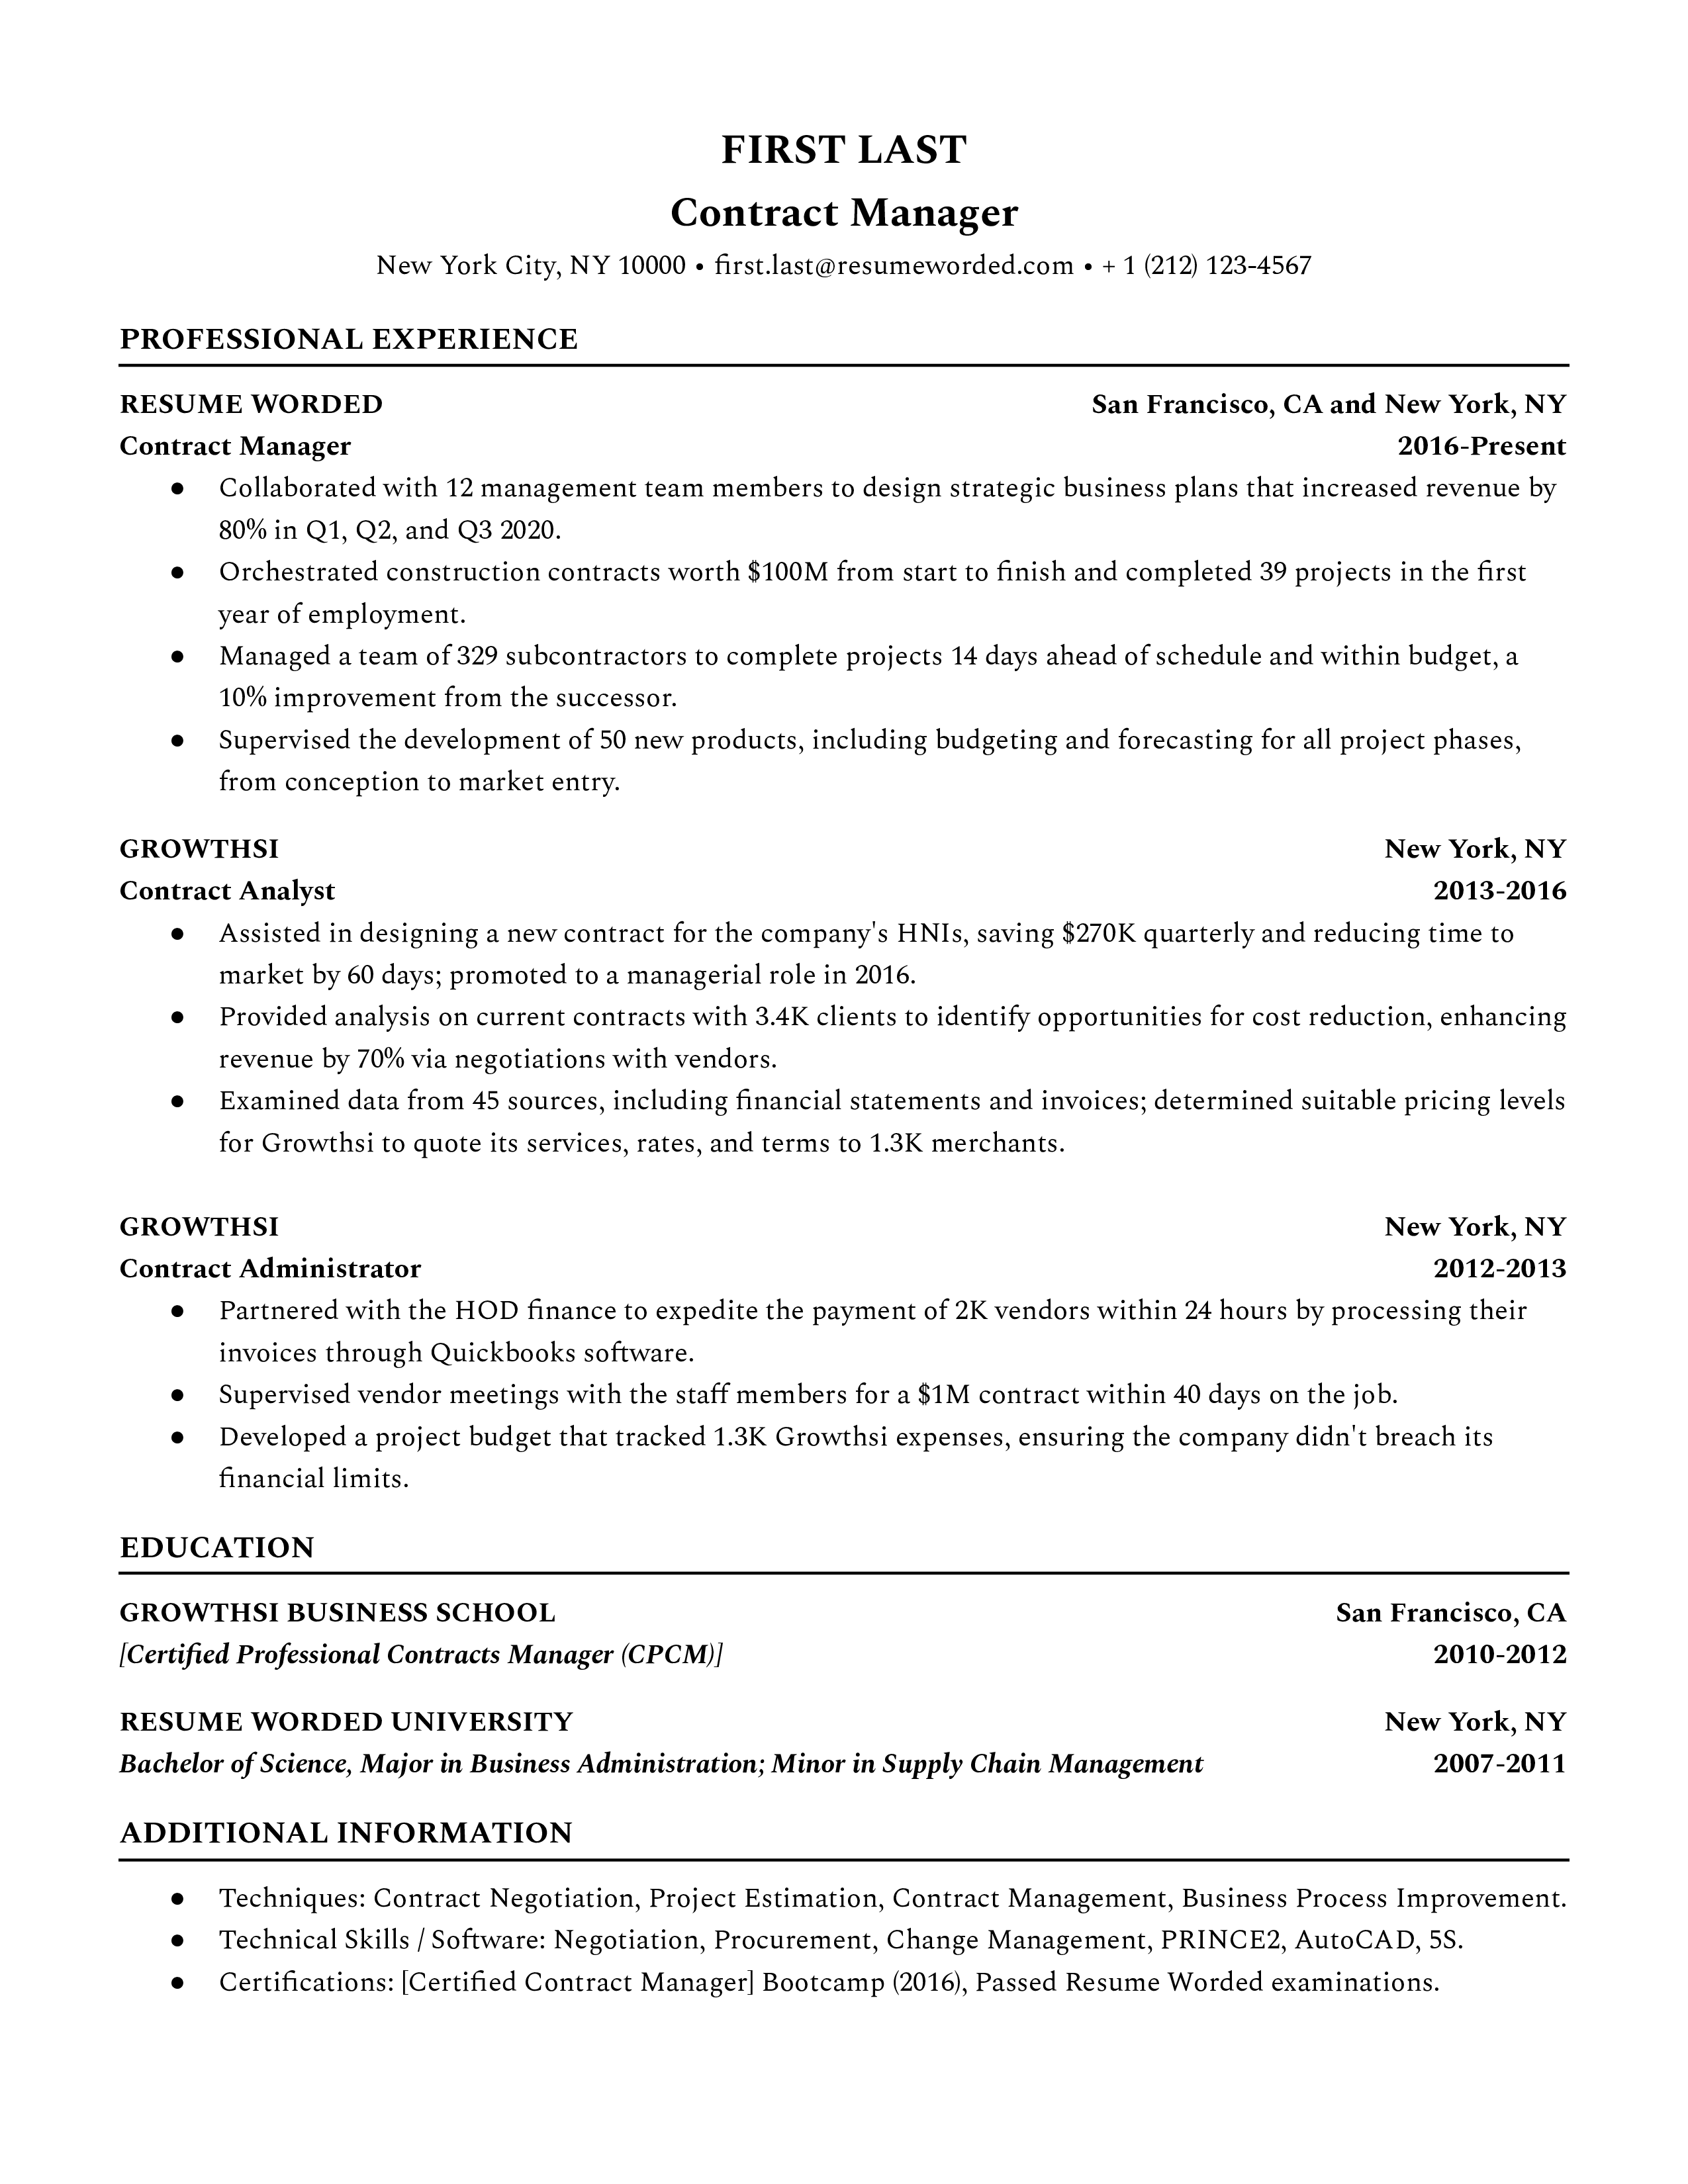 A professionally crafted resume highlighting relevant skills and experiences for a Contract Manager role.